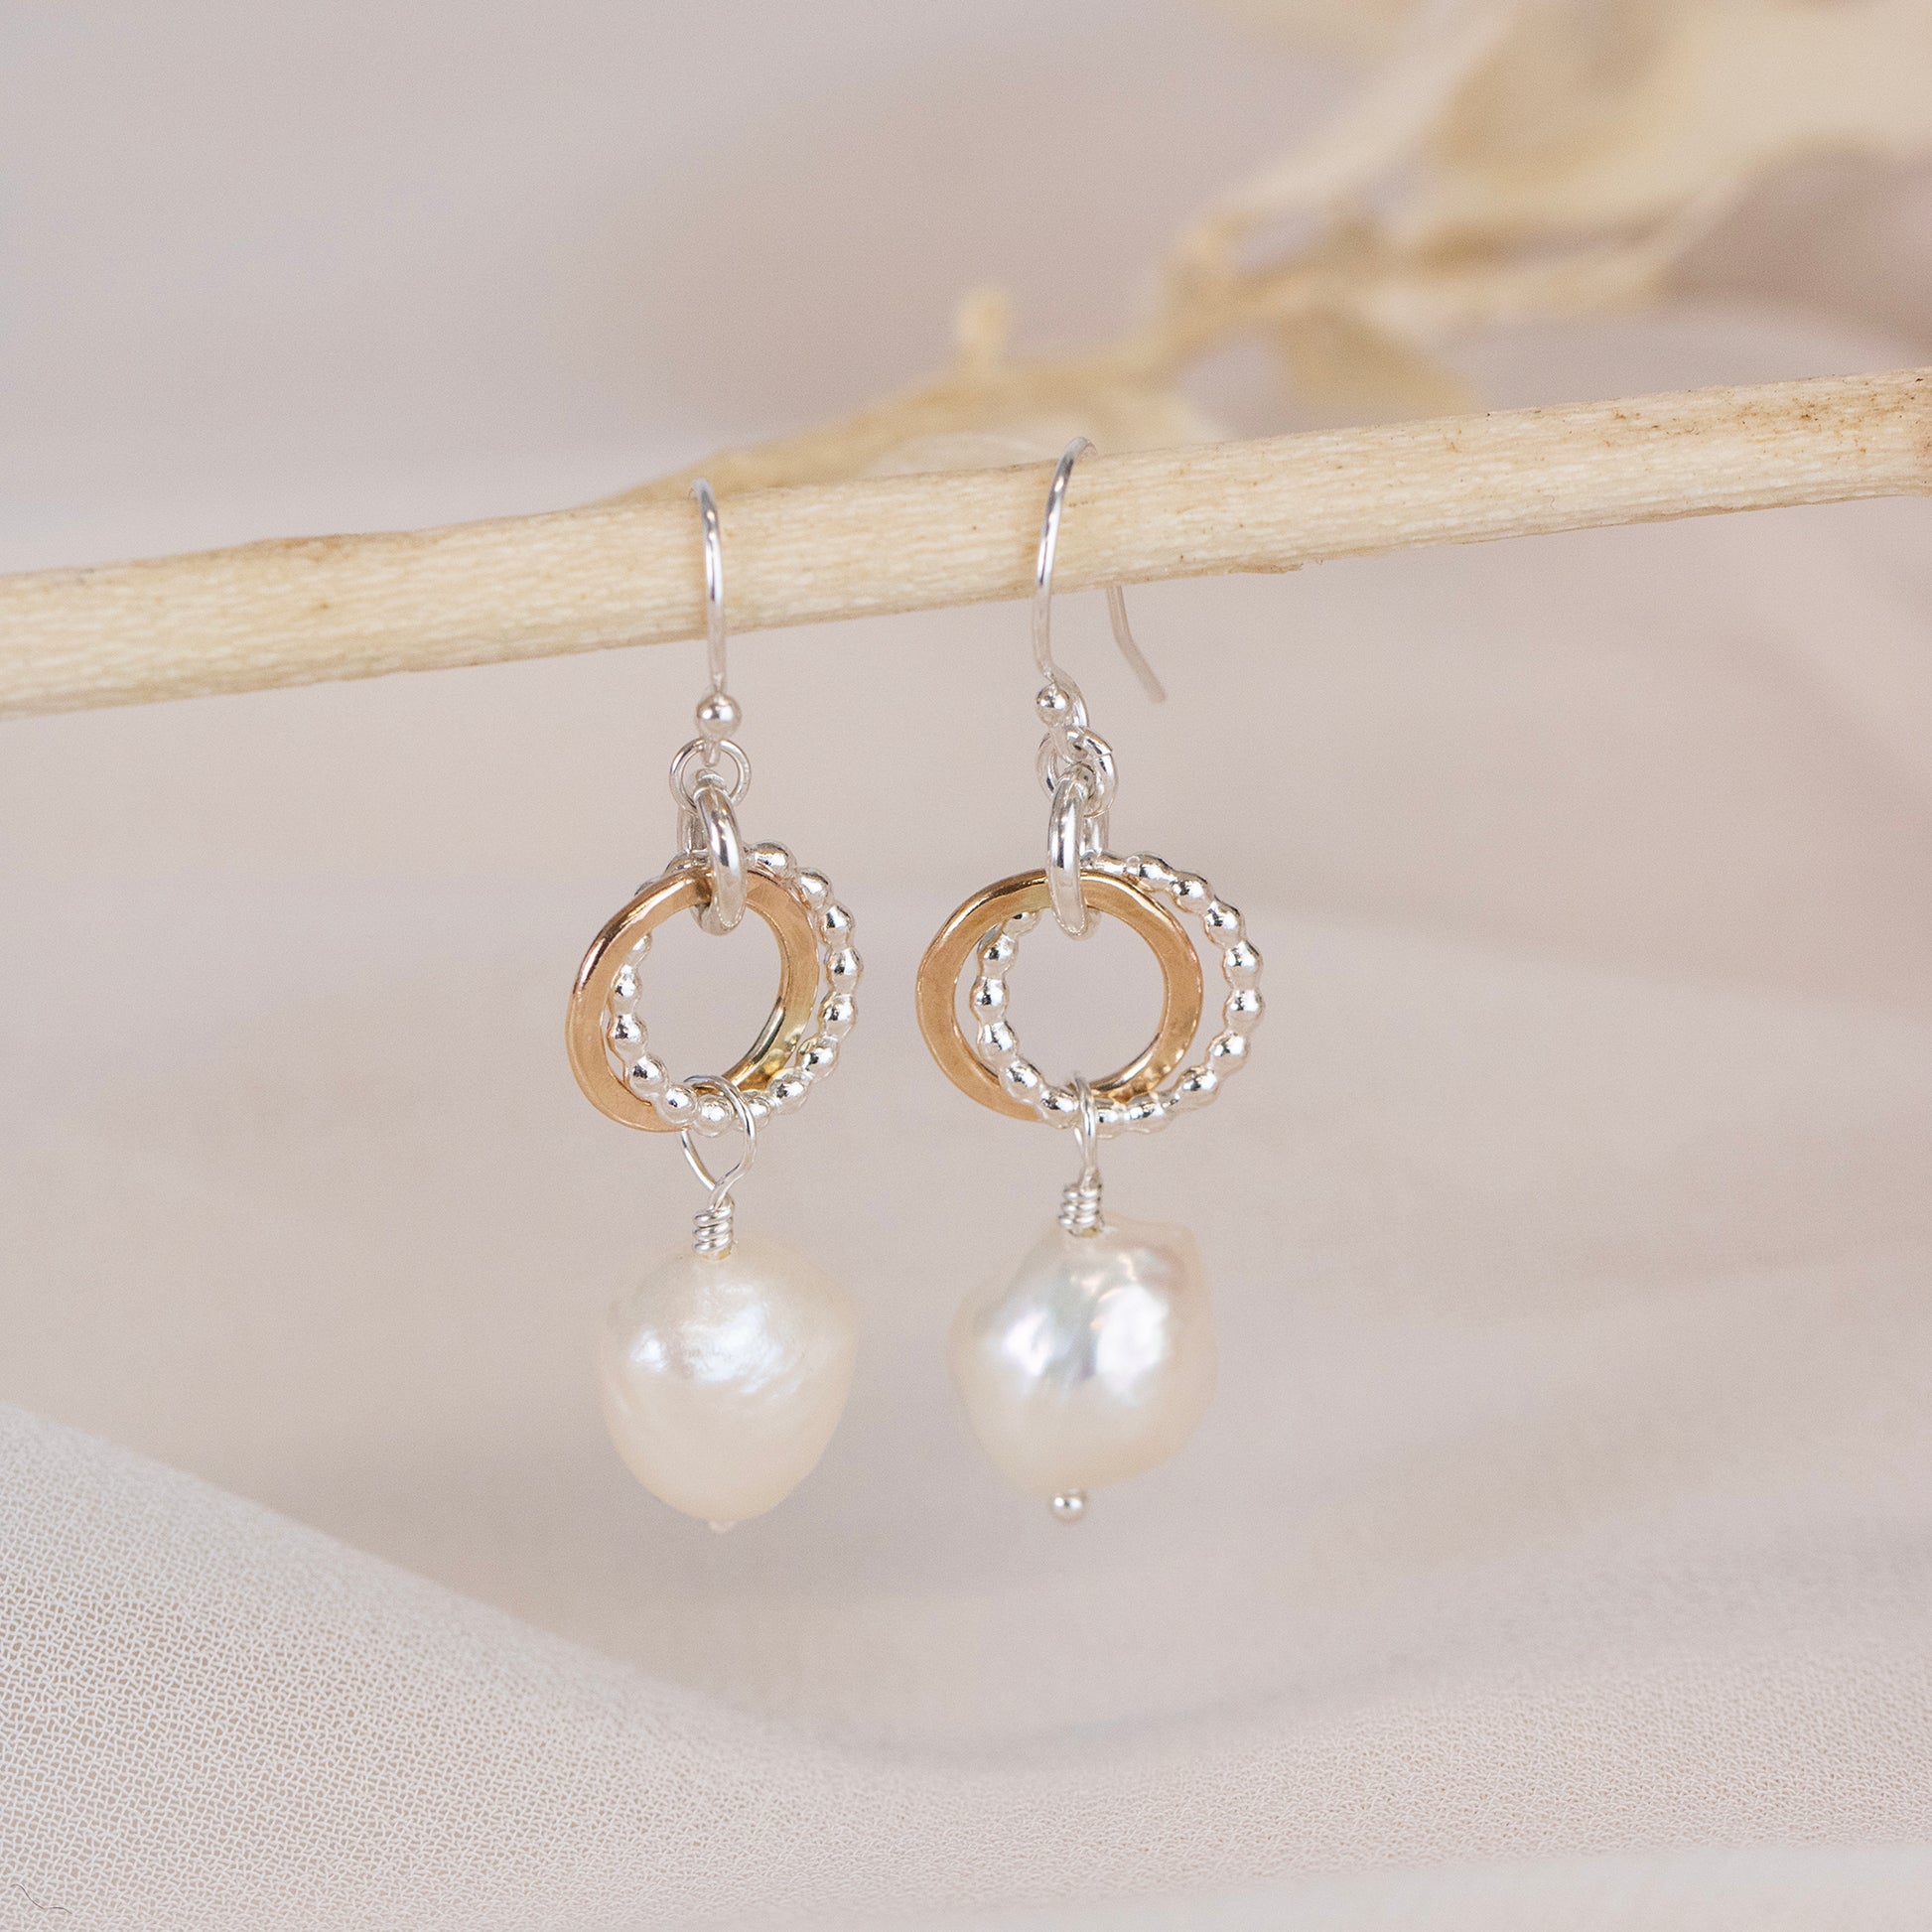 Will You Be My Bridesmaid Gift - Love Knot Pearl Earrings - Silver & Gold